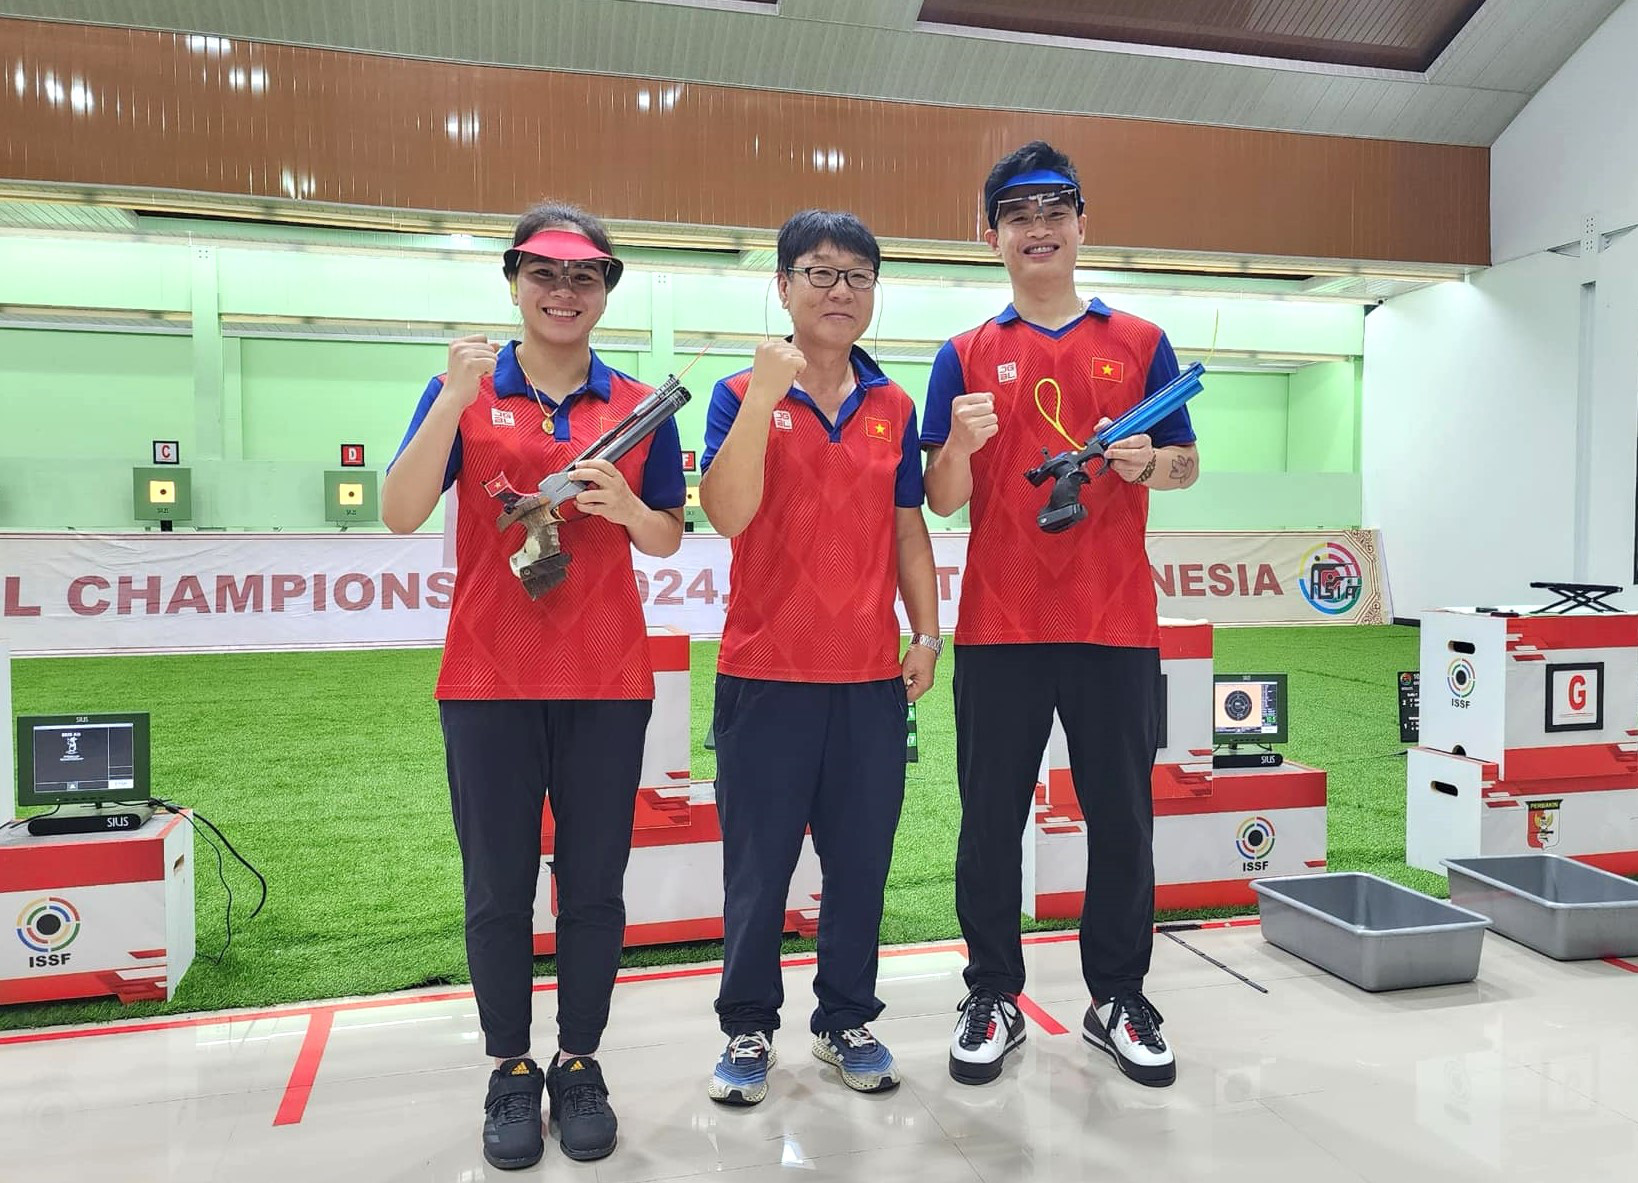 Vietnamese athletes Pham Quang Huy (R) and Trinh Thu Vinh (L) with head coach Park Chung Gun after winning the gold medal in the 10m air pistol mixed team event at the Asian Rifle/Pistol Championship 2024 in Indonesia, January 9, 2024. Photo: Nhung Nguyen / Tuoi Tre